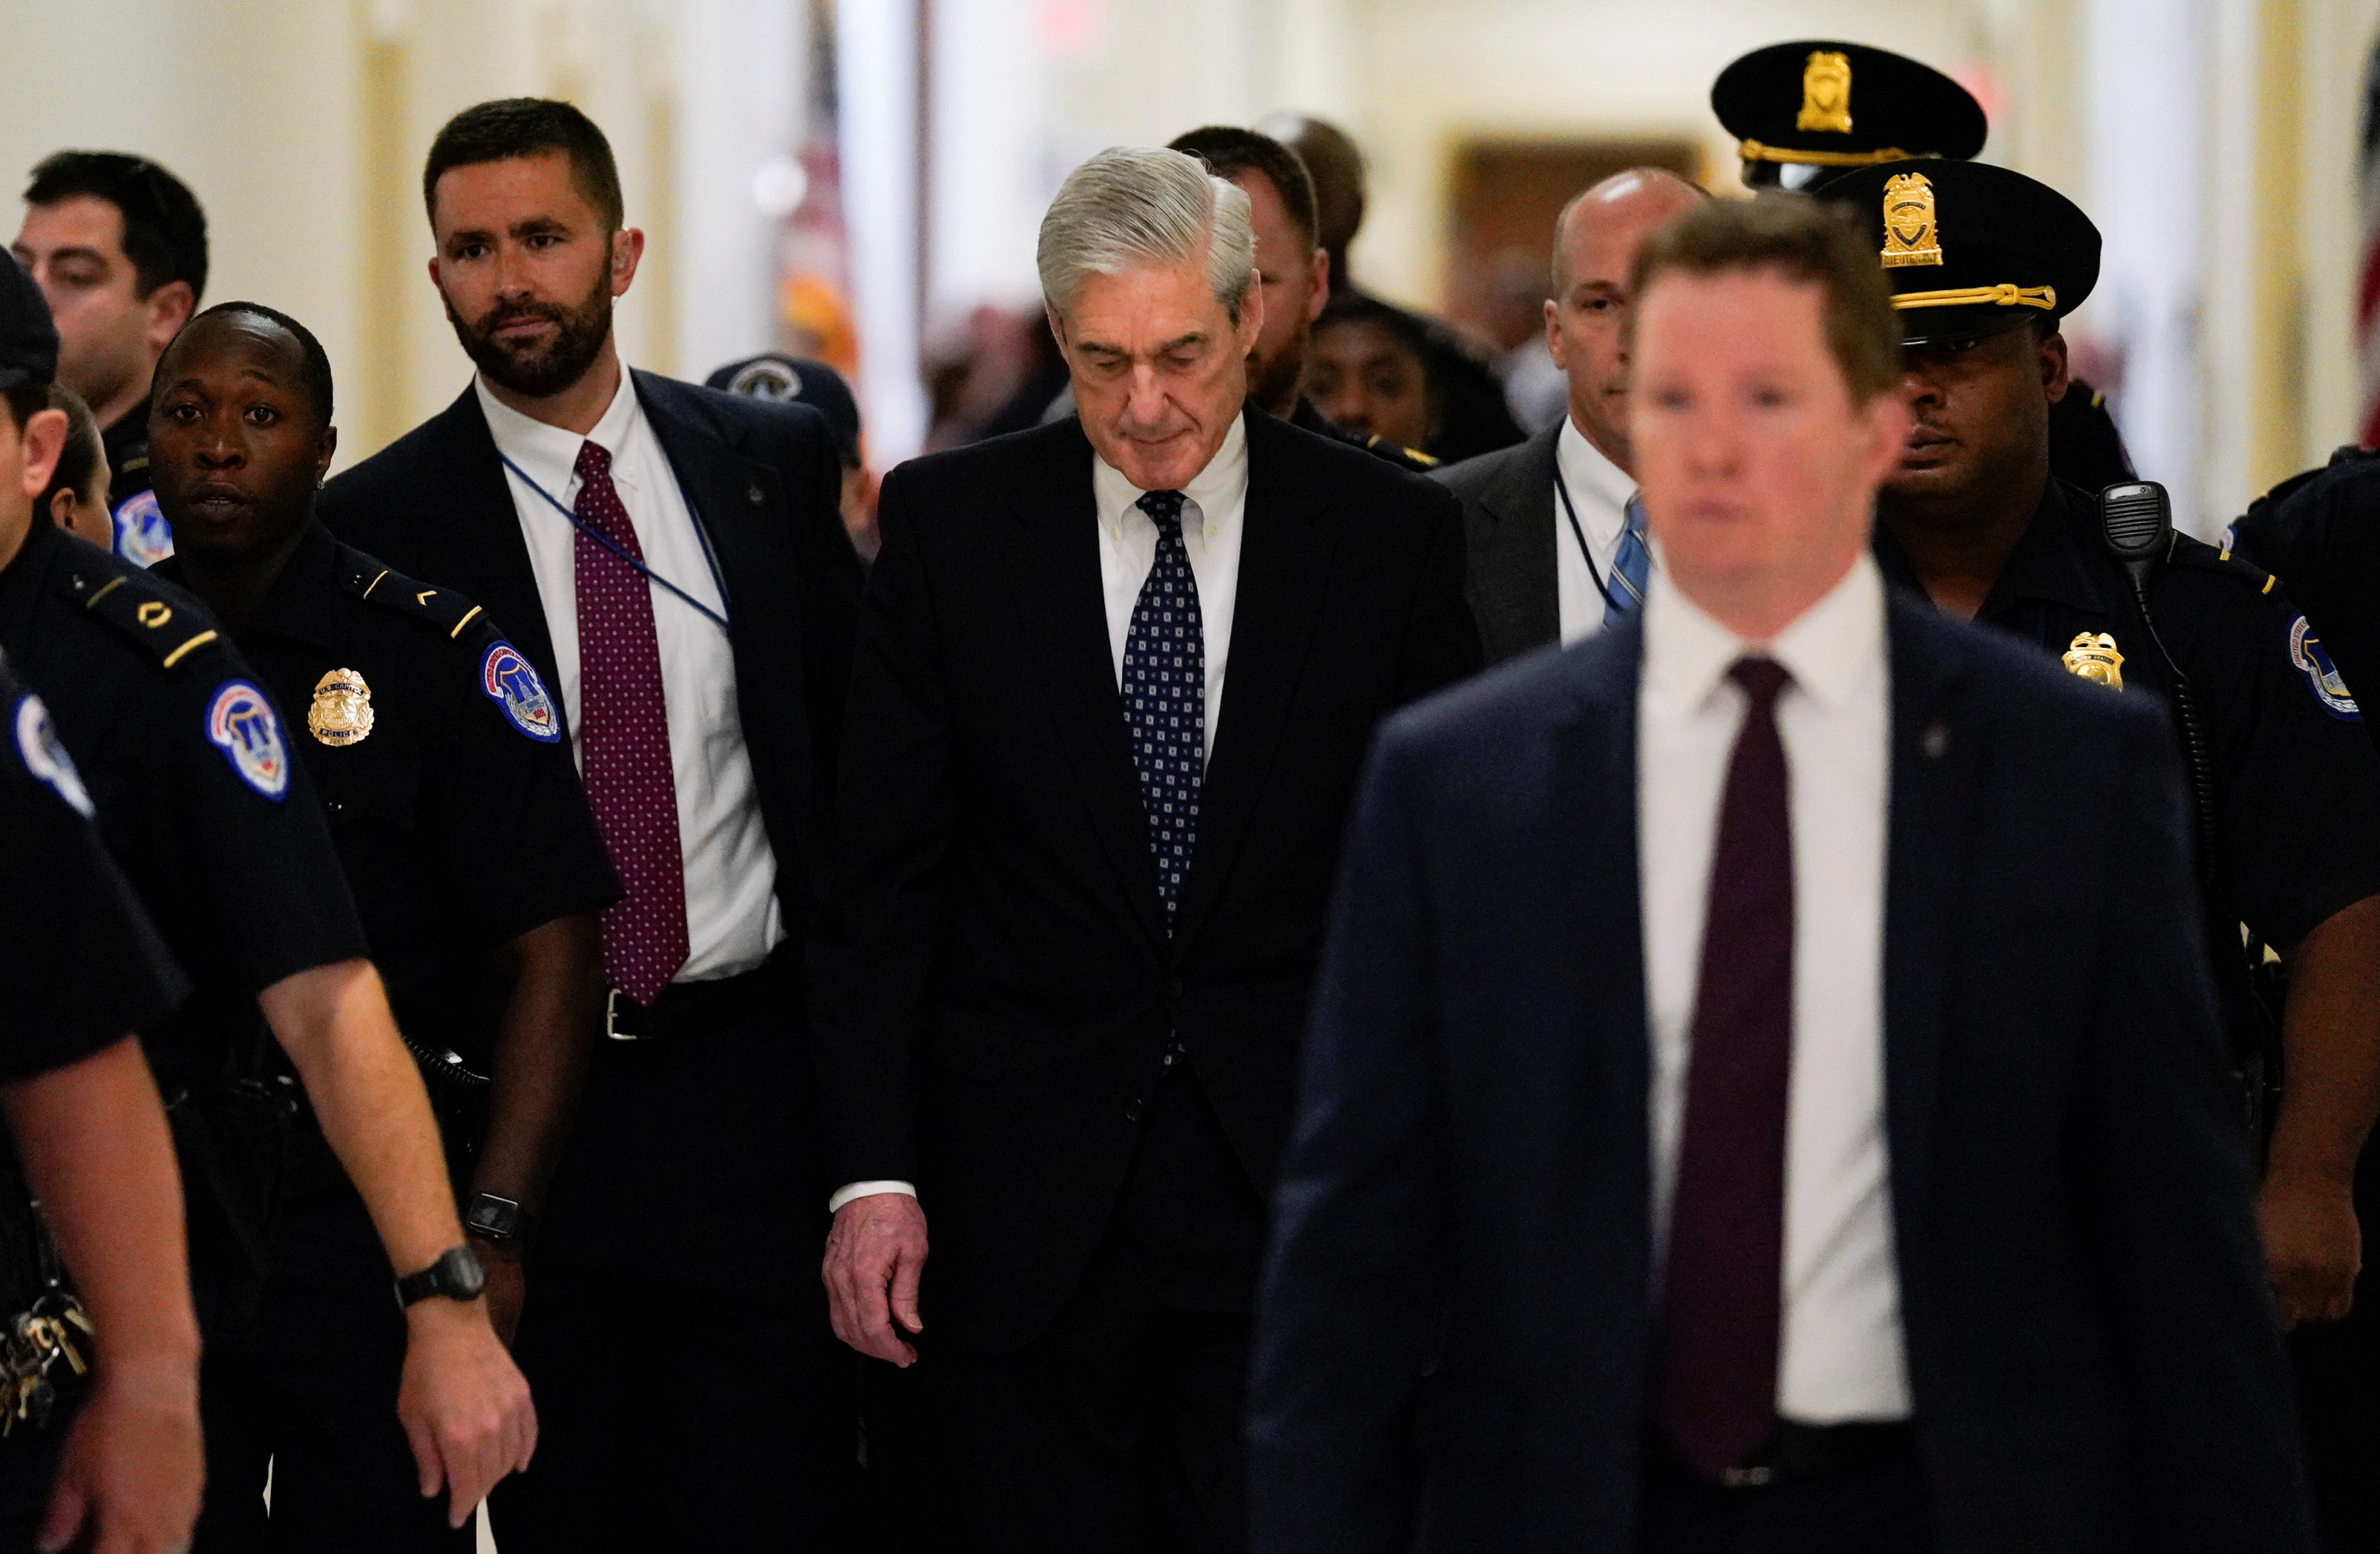 Former Special Counsel Robert Mueller arrives to testify before a House Judiciary Committee hearing on the Office of Special Counsel's investigation and the Mueller Report on Capitol Hill in Washington, U.S., July 24, 2019. REUTERS/Aaron P. Bernstein